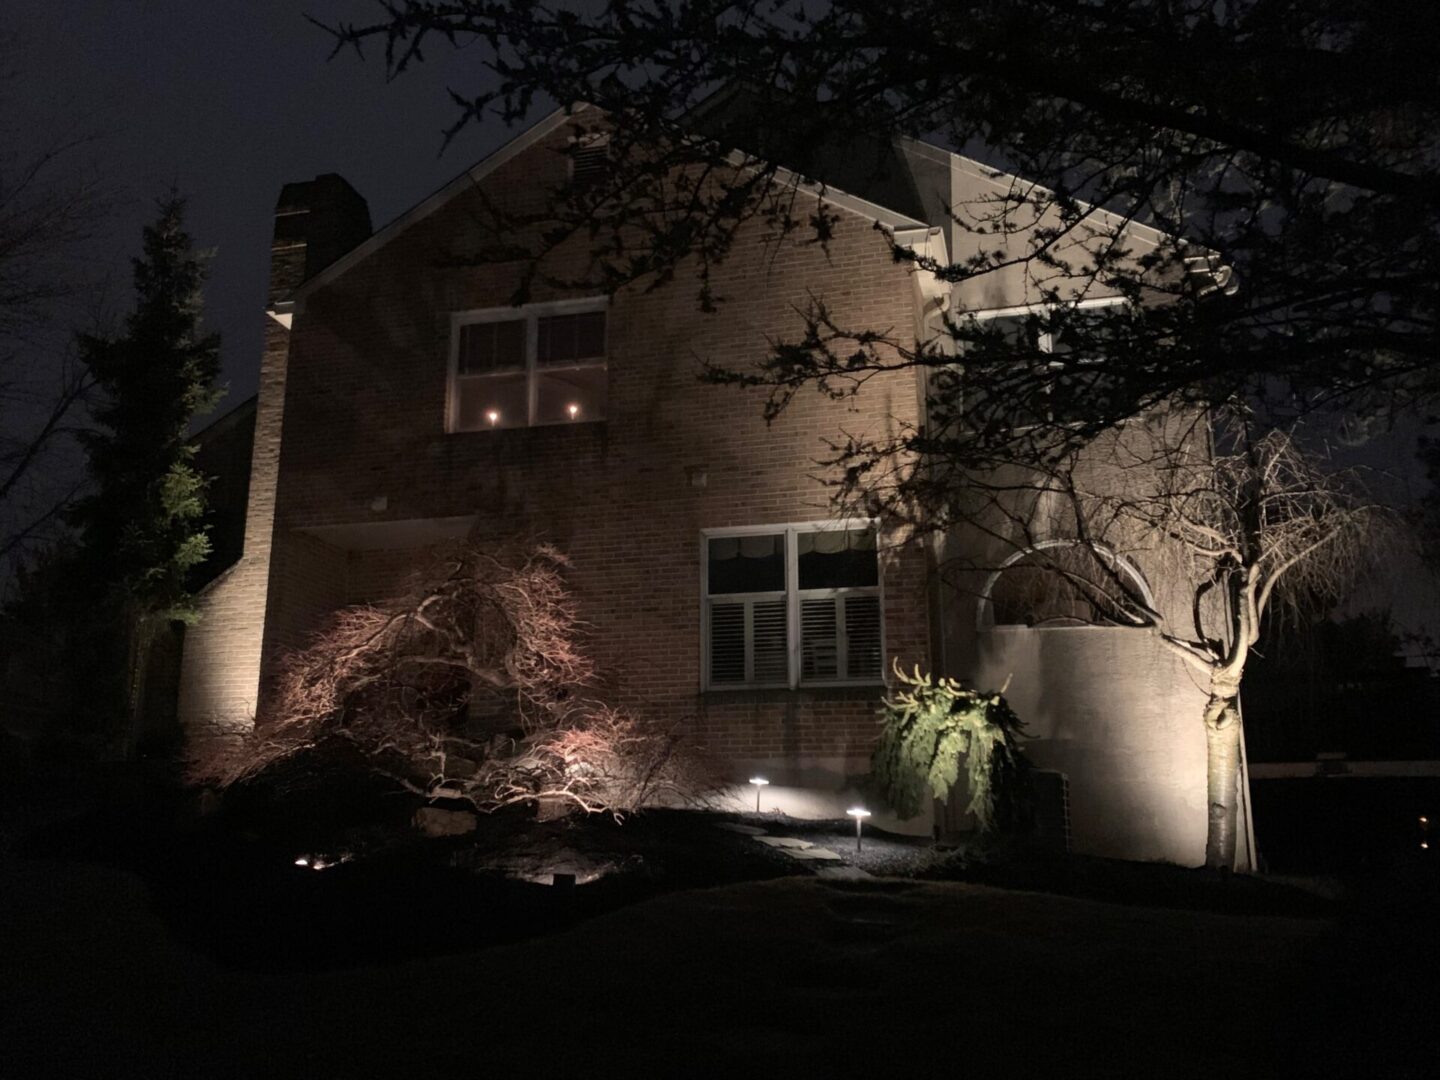 A House in Night, Tree in Front and Customized Lights